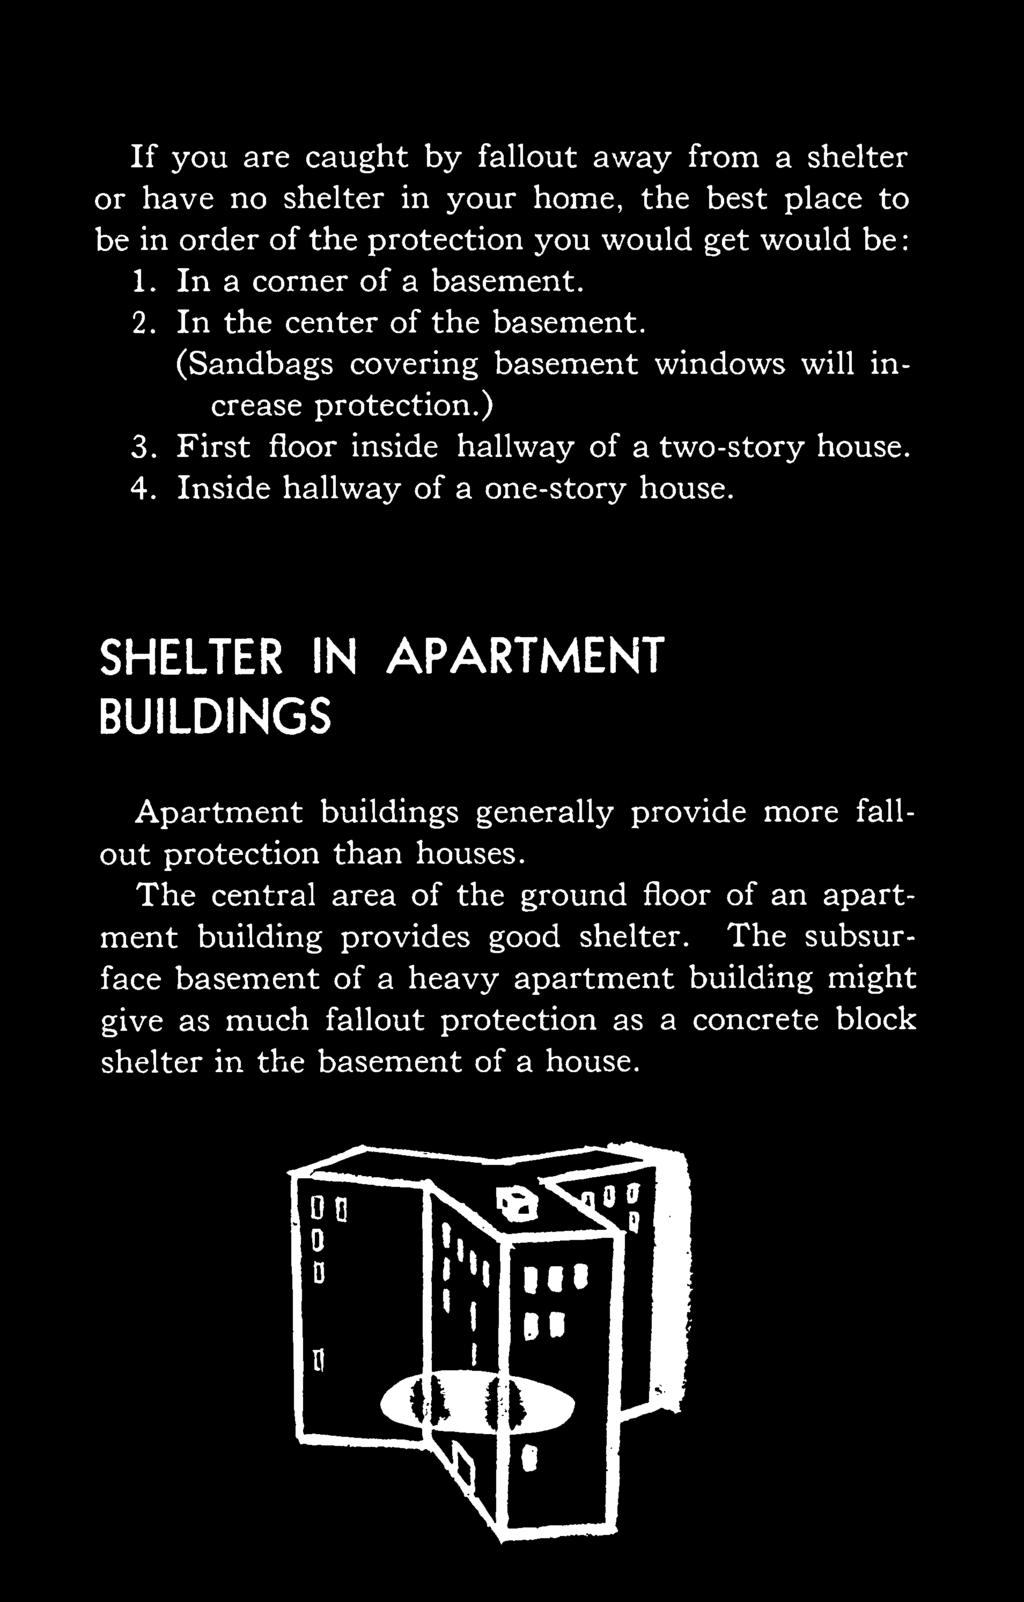 SHELTER IN BUILDINGS APARTMENT Apartment buildings generally provide more fallout protection than houses.